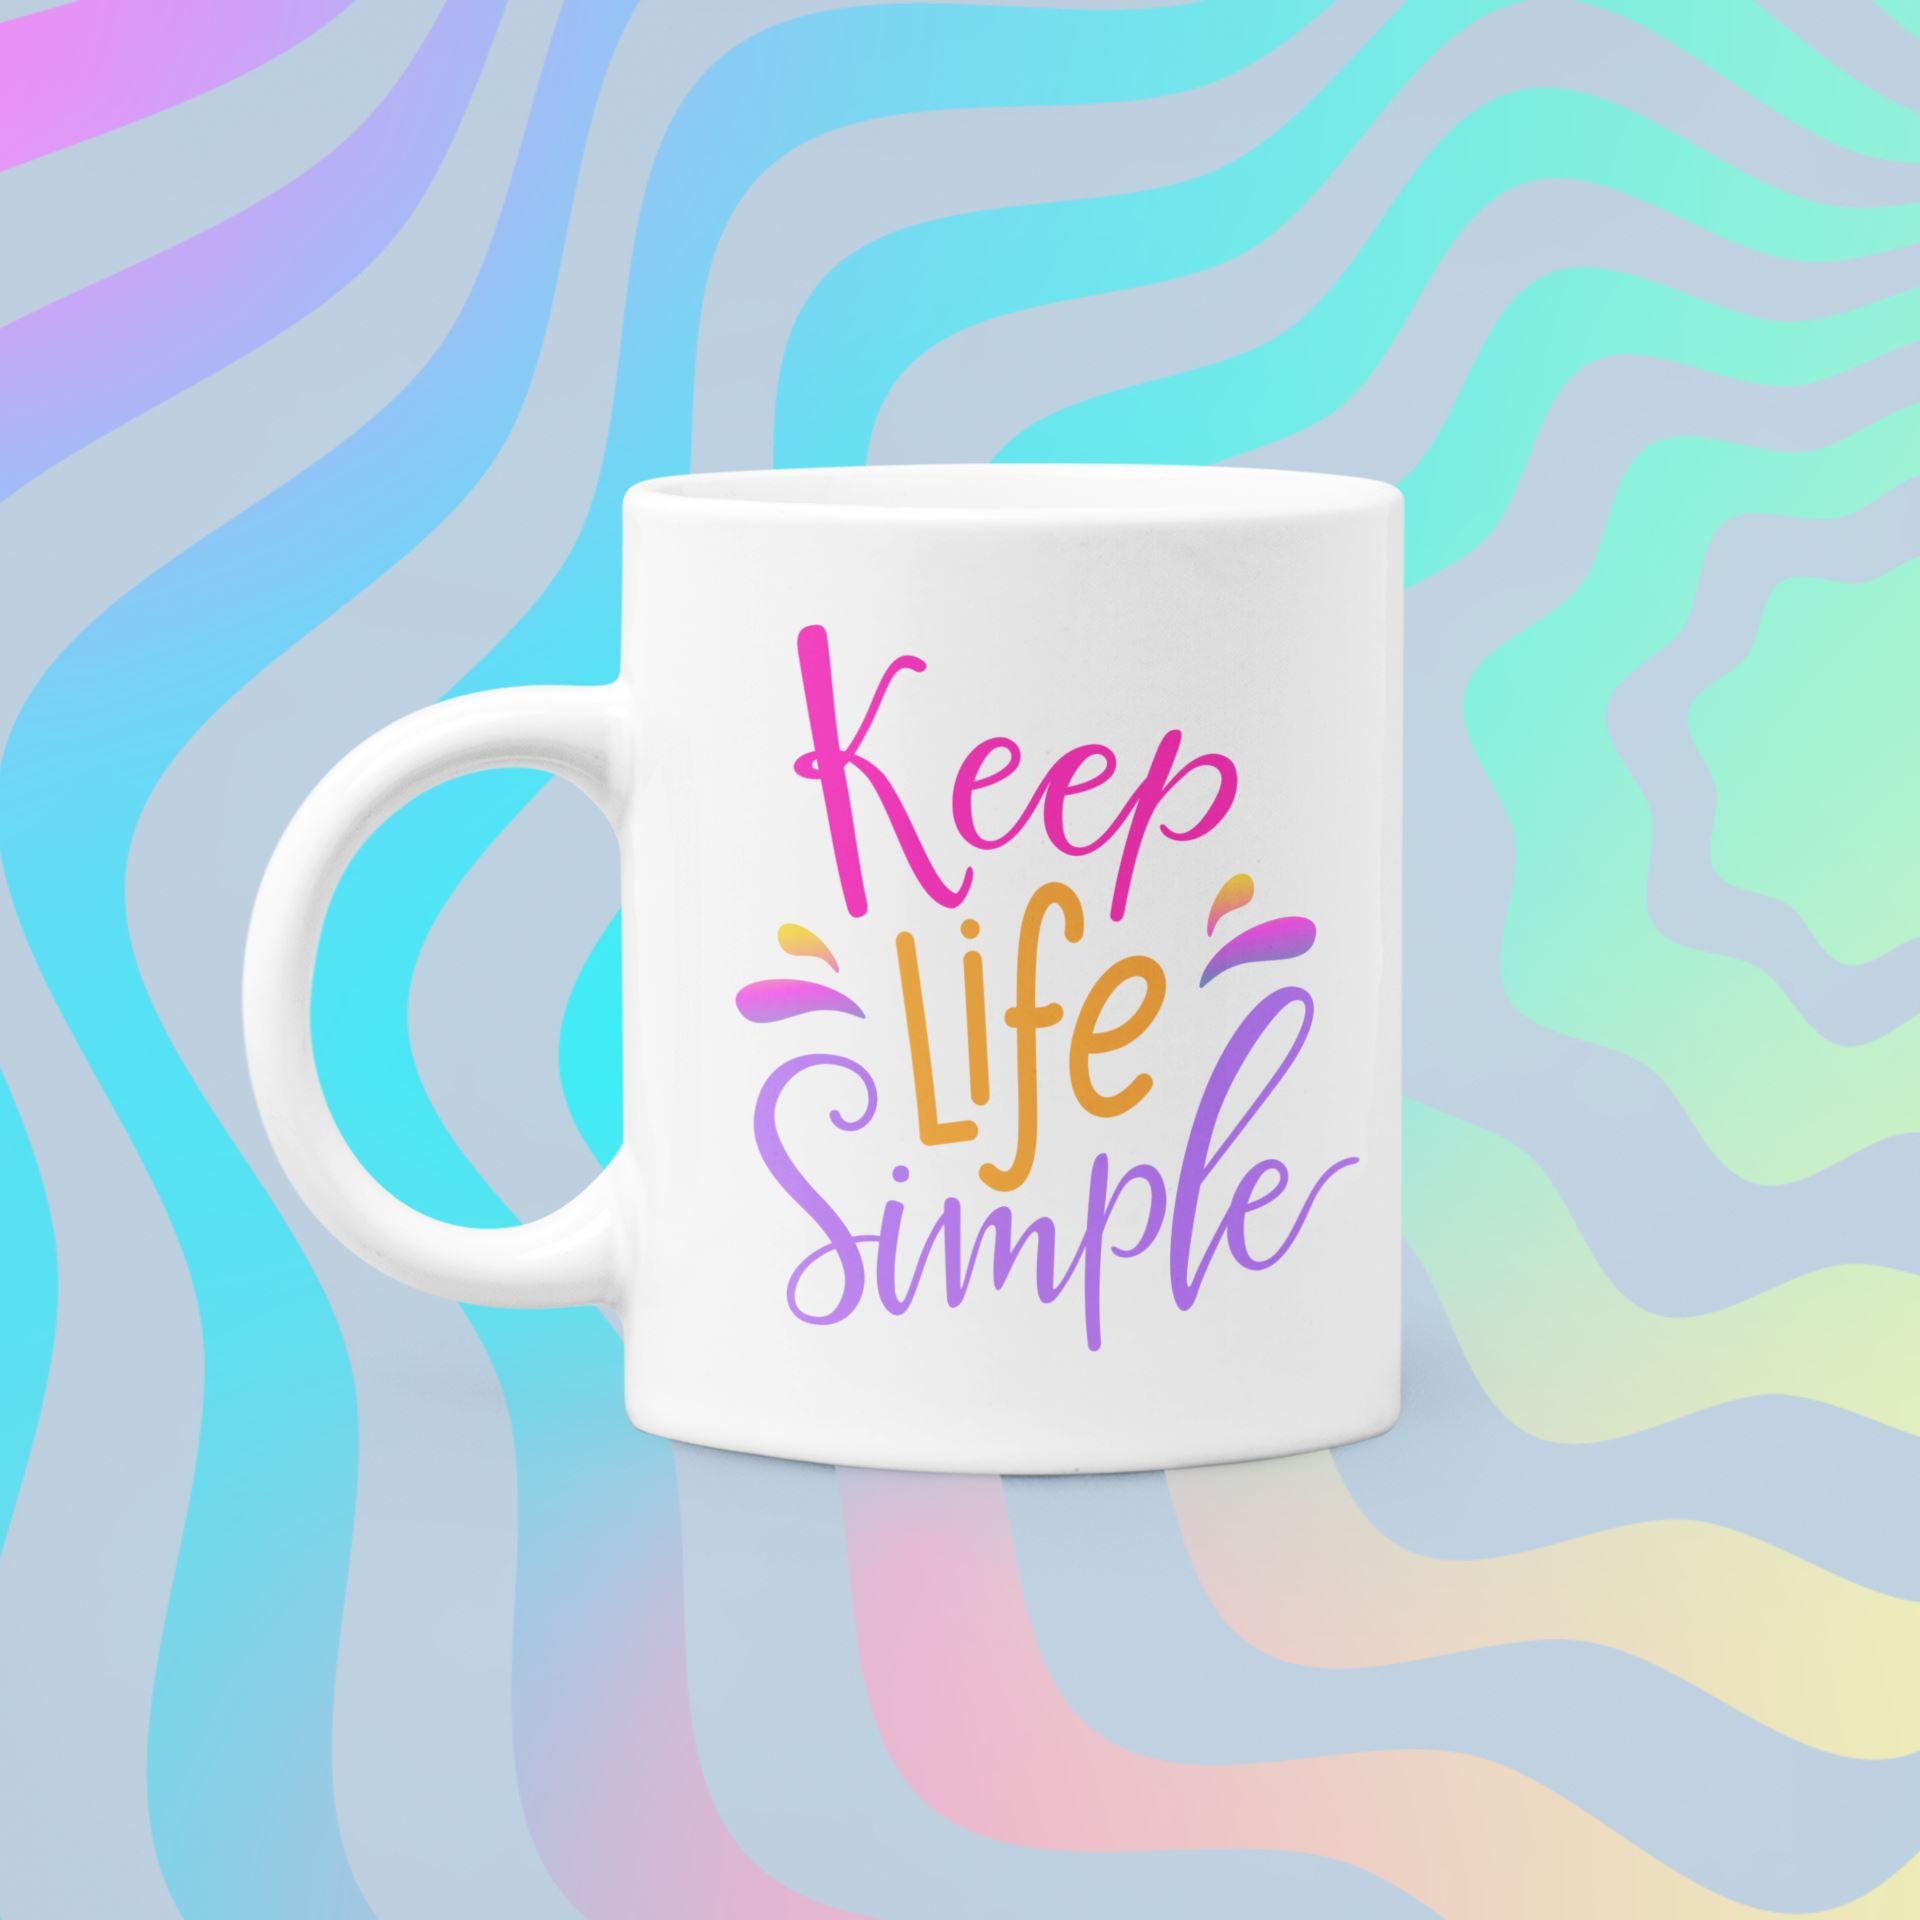 SketchLab Silver mugs for sublimation 11 oz (box of 12 and 36